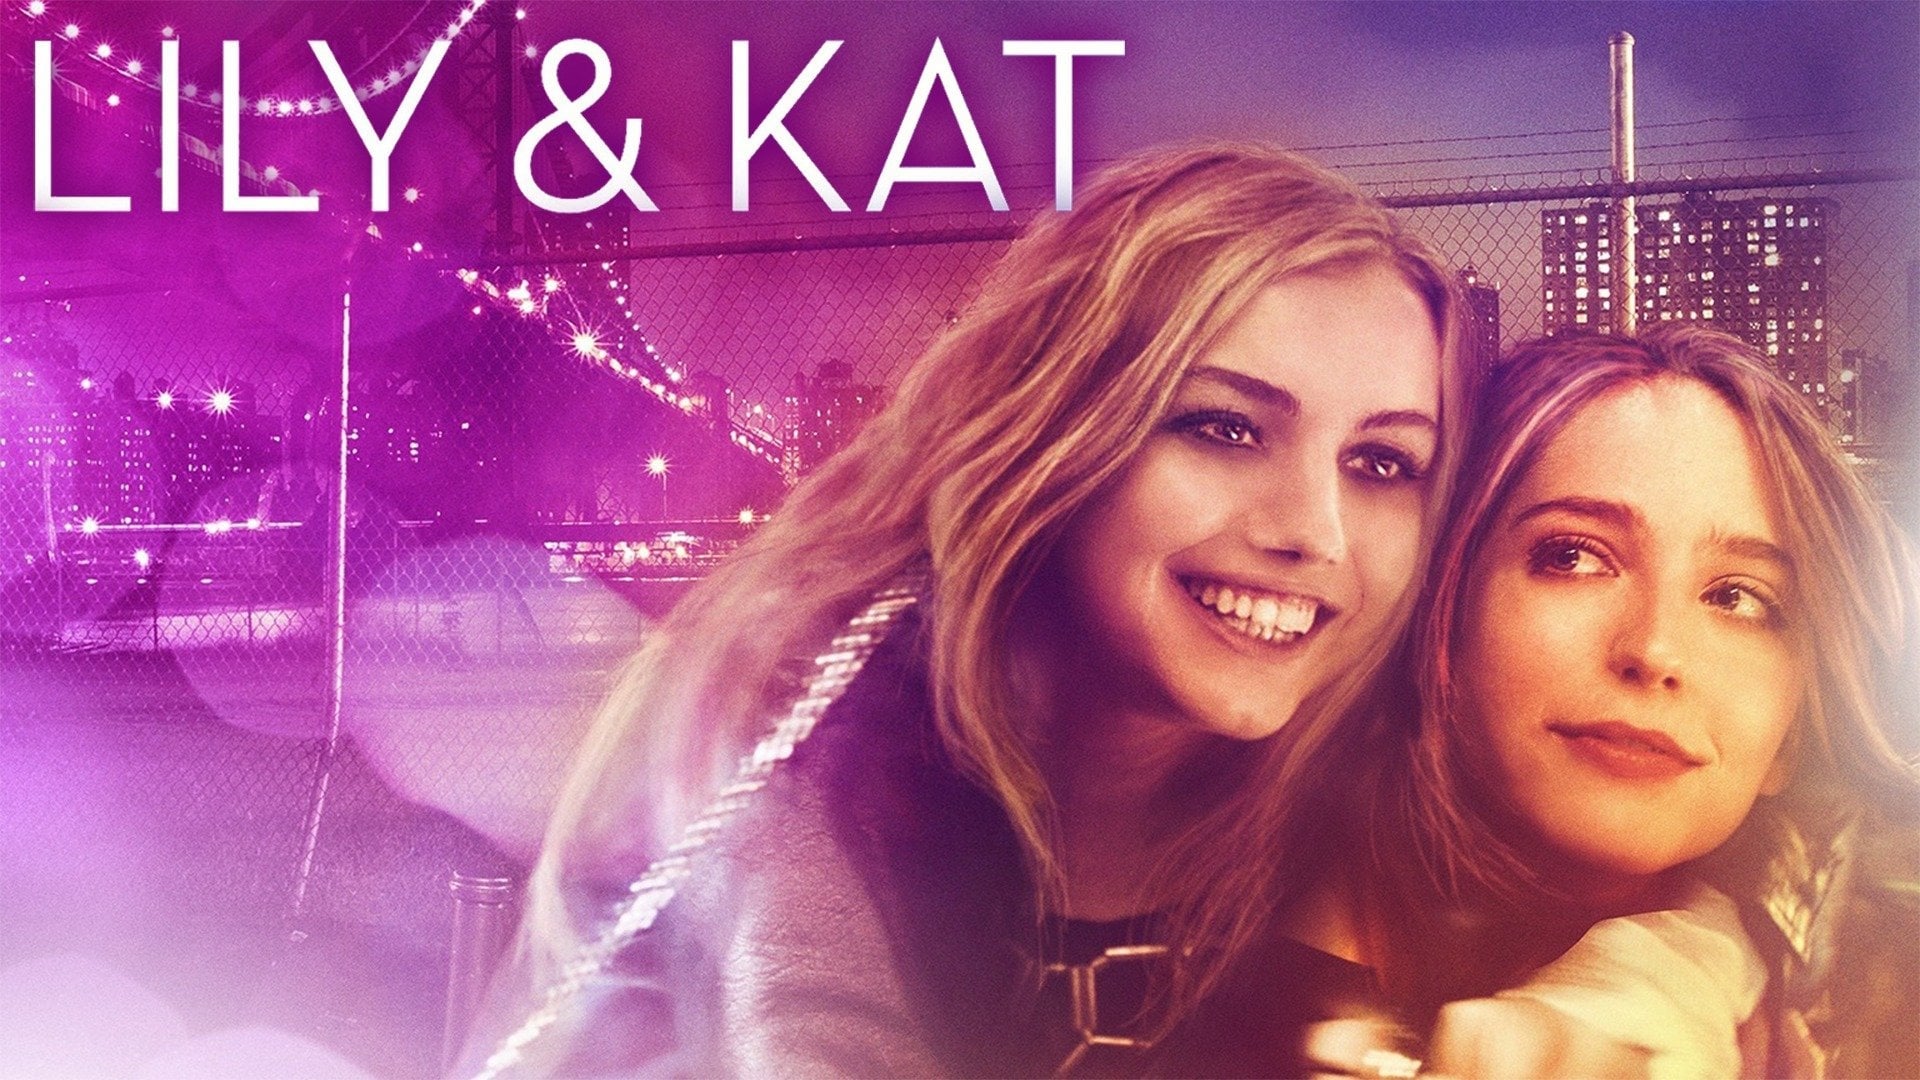 lily & kat (2015),Full Movie, Watch Free Online HD Stream and Download,...